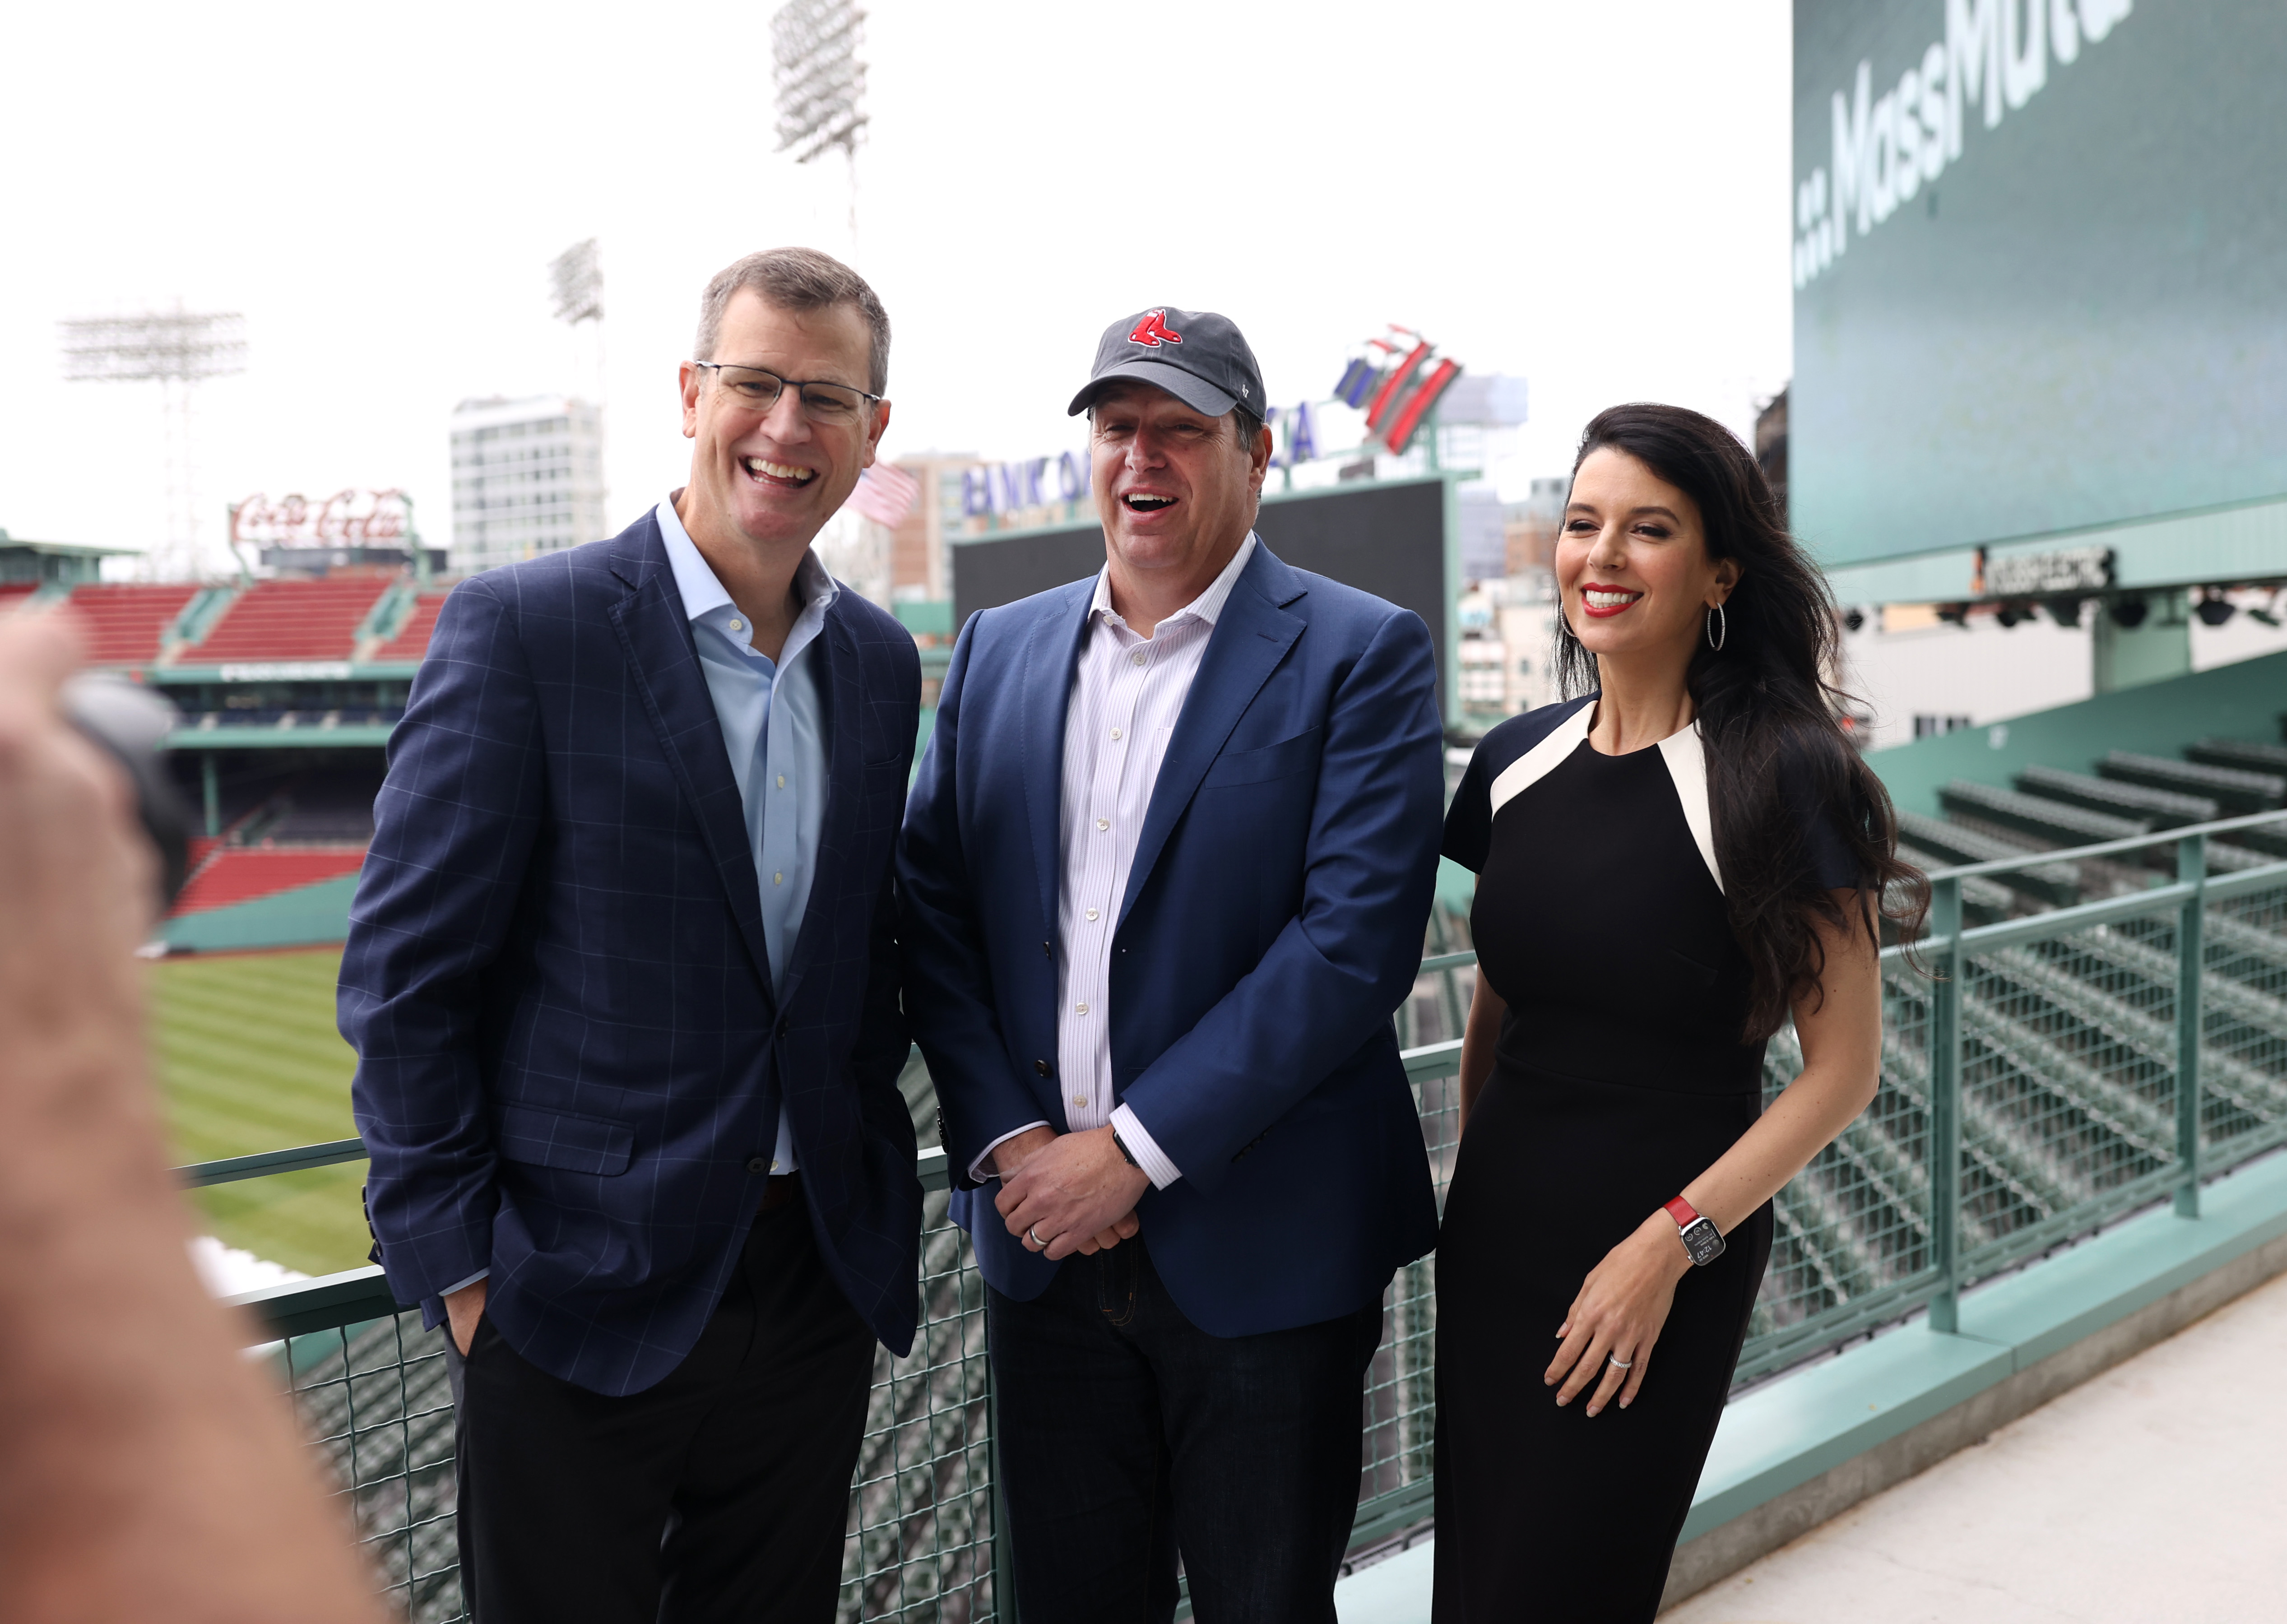 MassMutual will be the first sponsor to have its logo on Red Sox